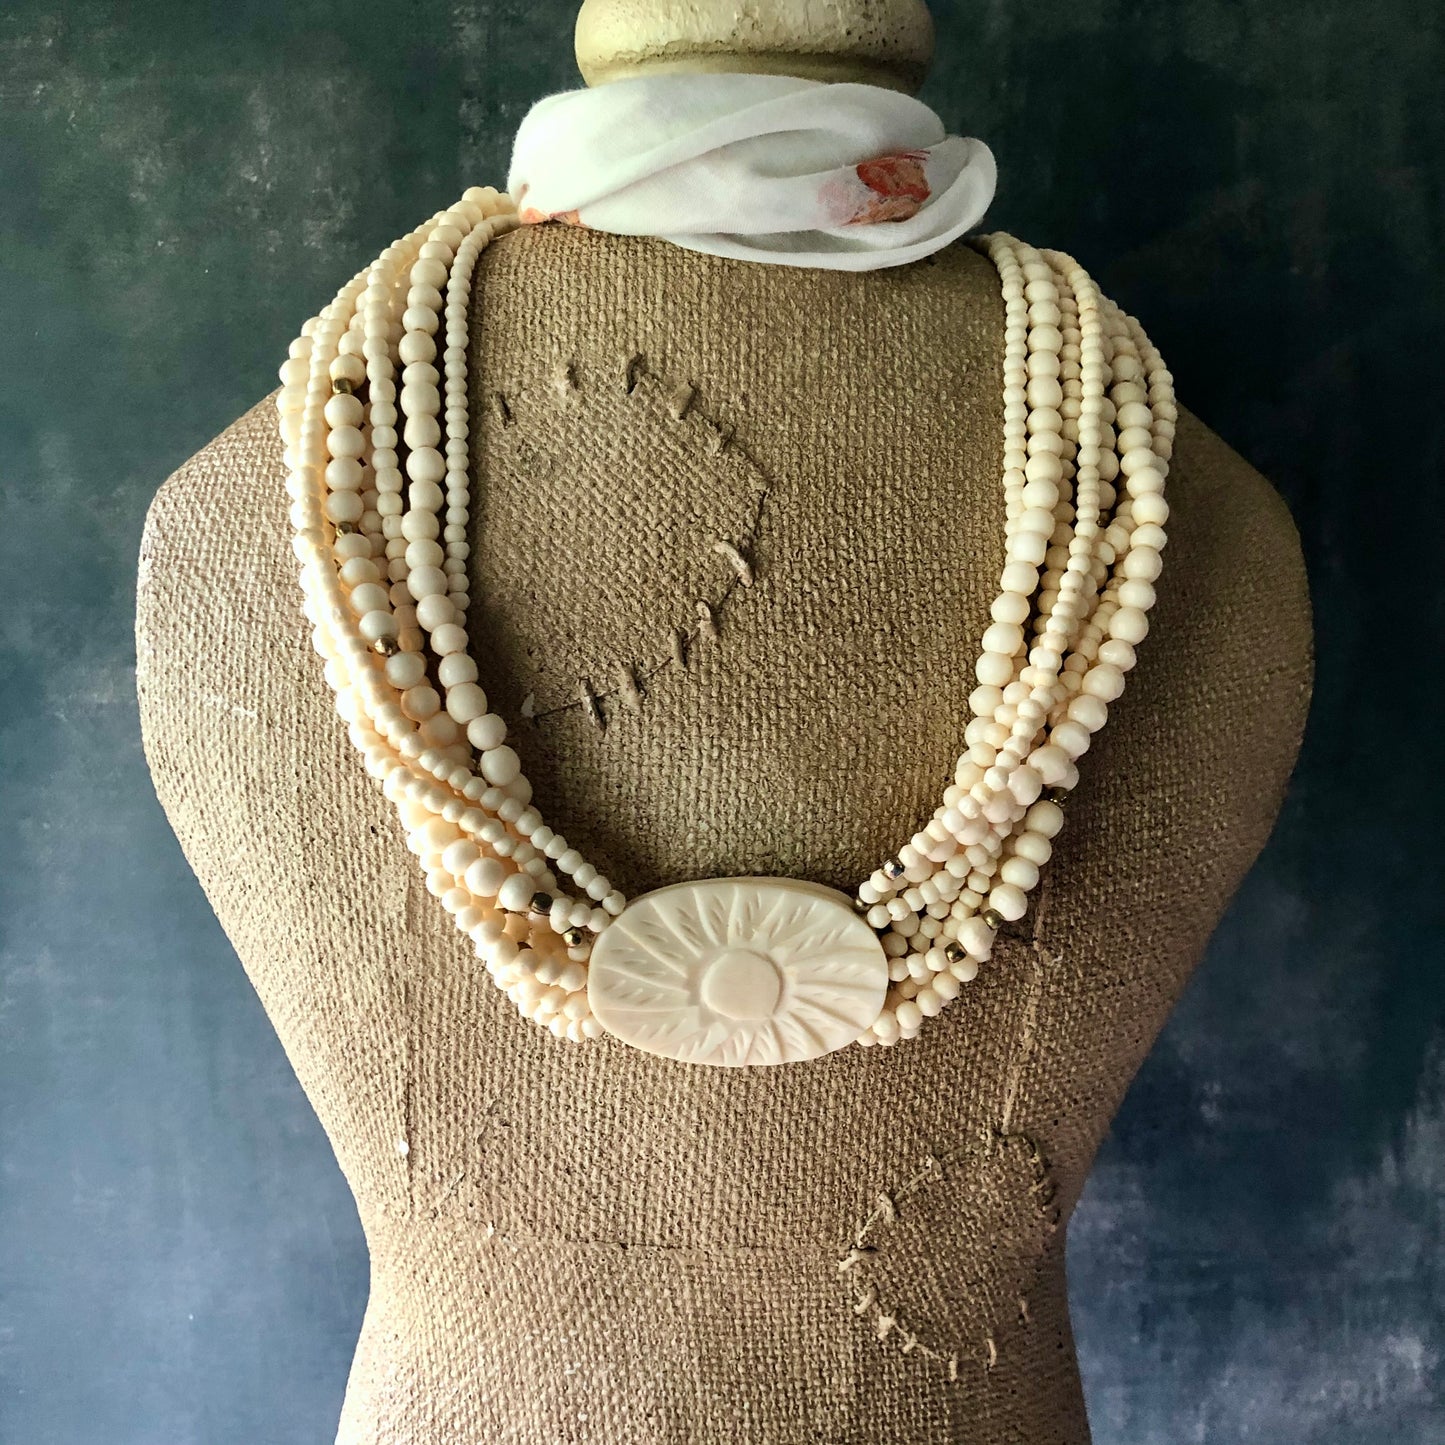 Vintage Celluloid Beaded Choker Necklace (c.1950s)